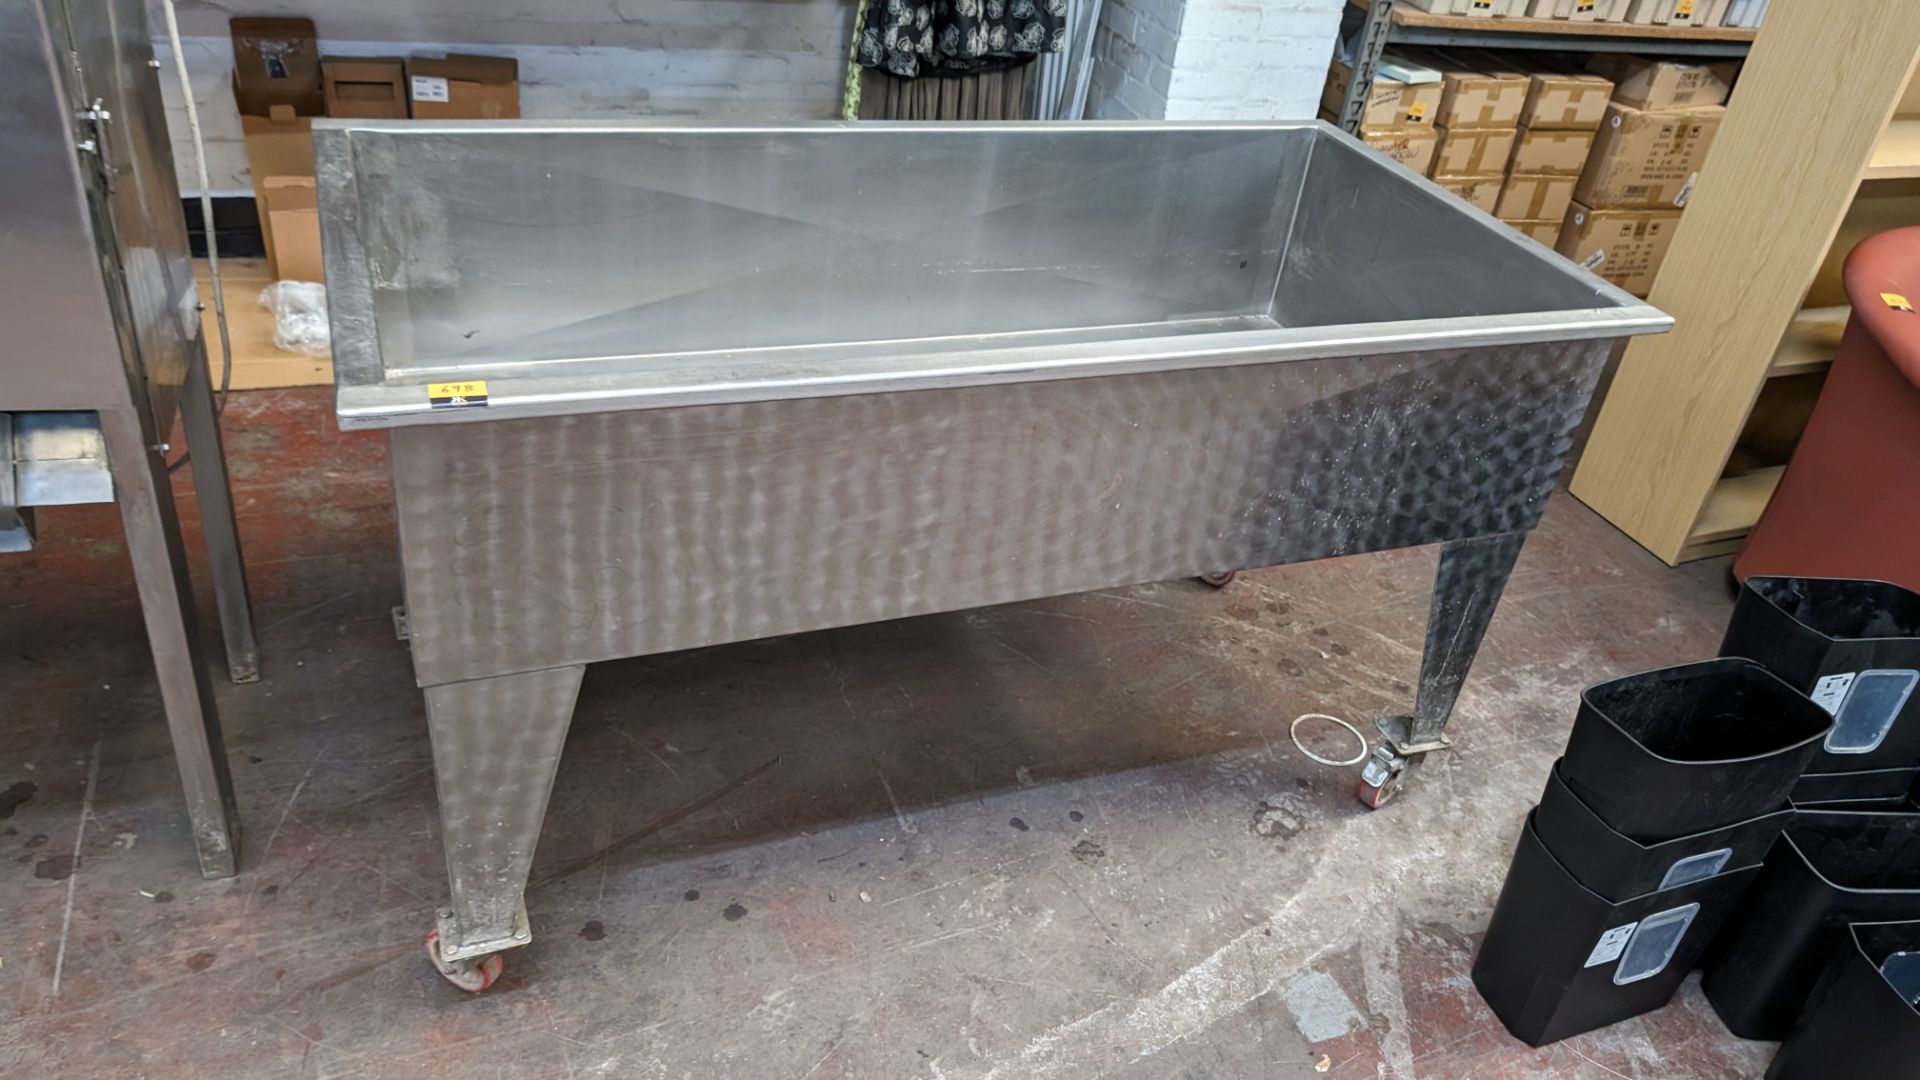 Mobile mozzarella hardening tank. Understood to have been bought in 2018